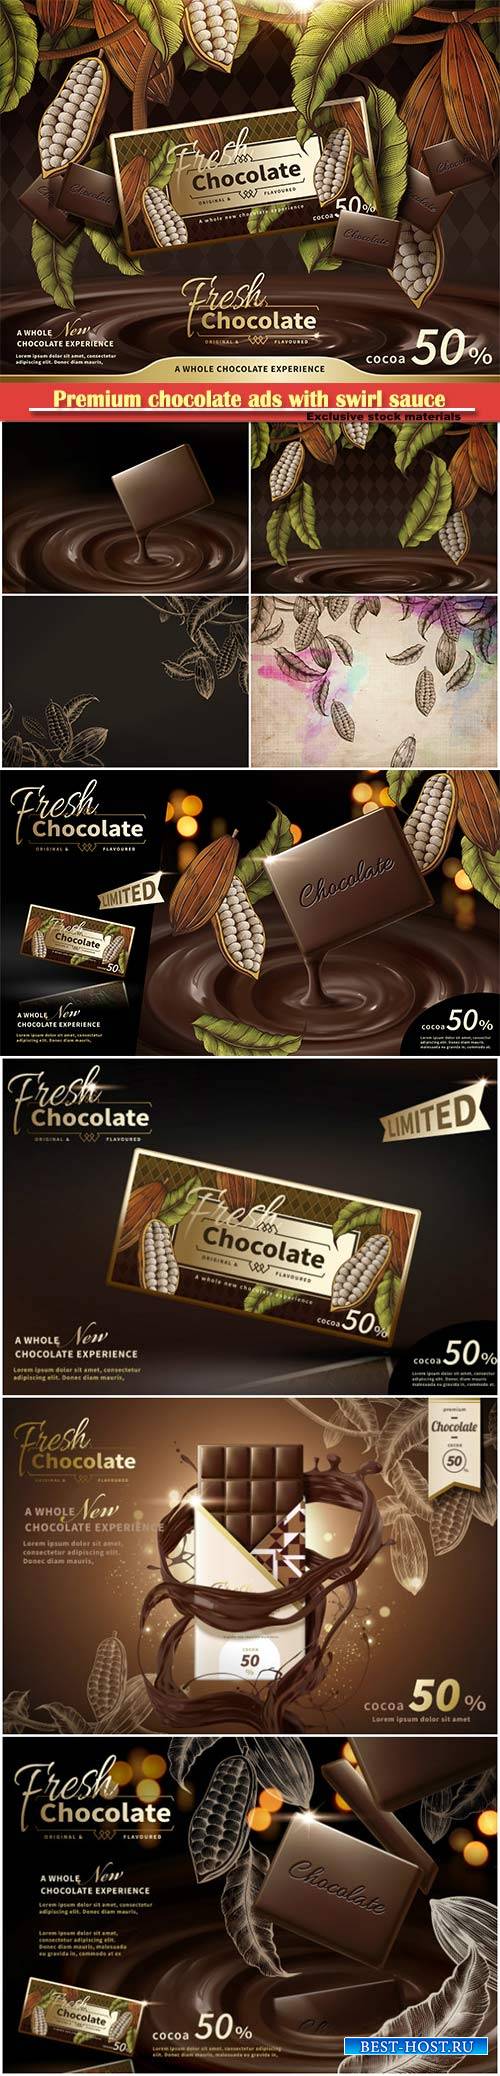 Premium chocolate ads with swirl sauce in 3d illustration, engraved cacao plants elements